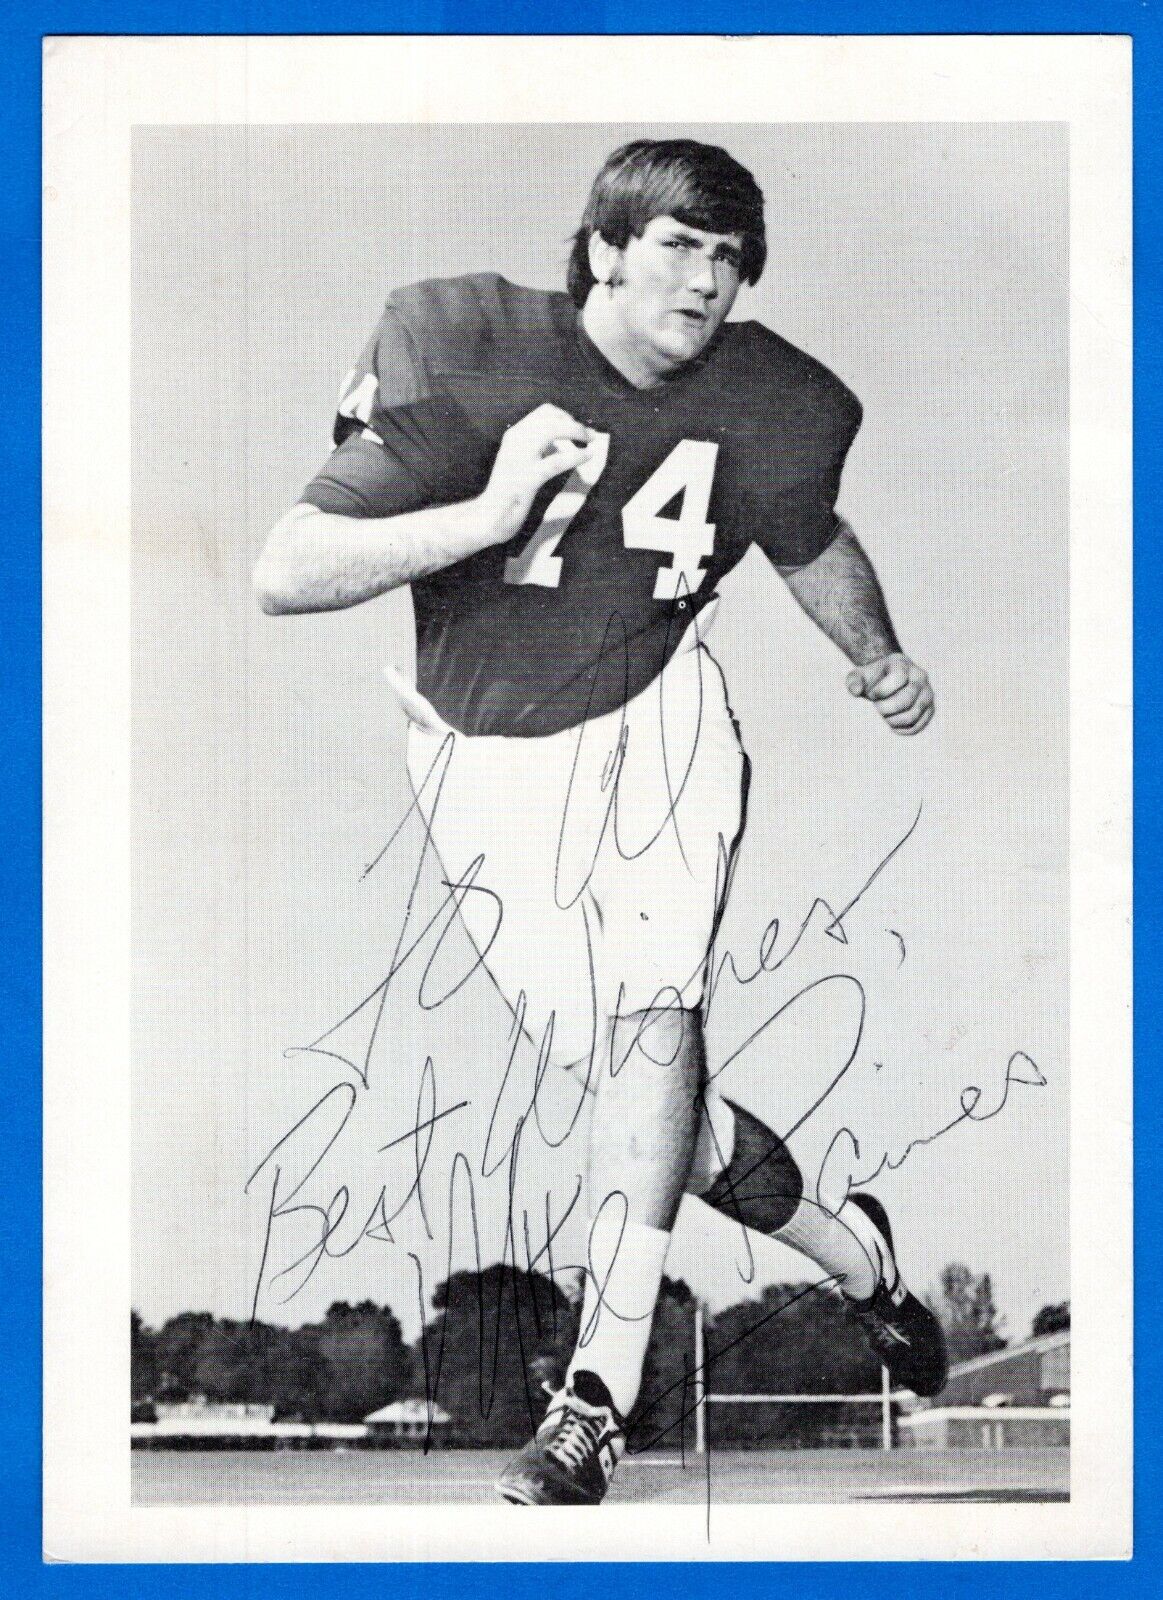 Mike Raines Football Player Hand Signed Autograph 5x7 Photo Poster painting JSA Sticker No Card